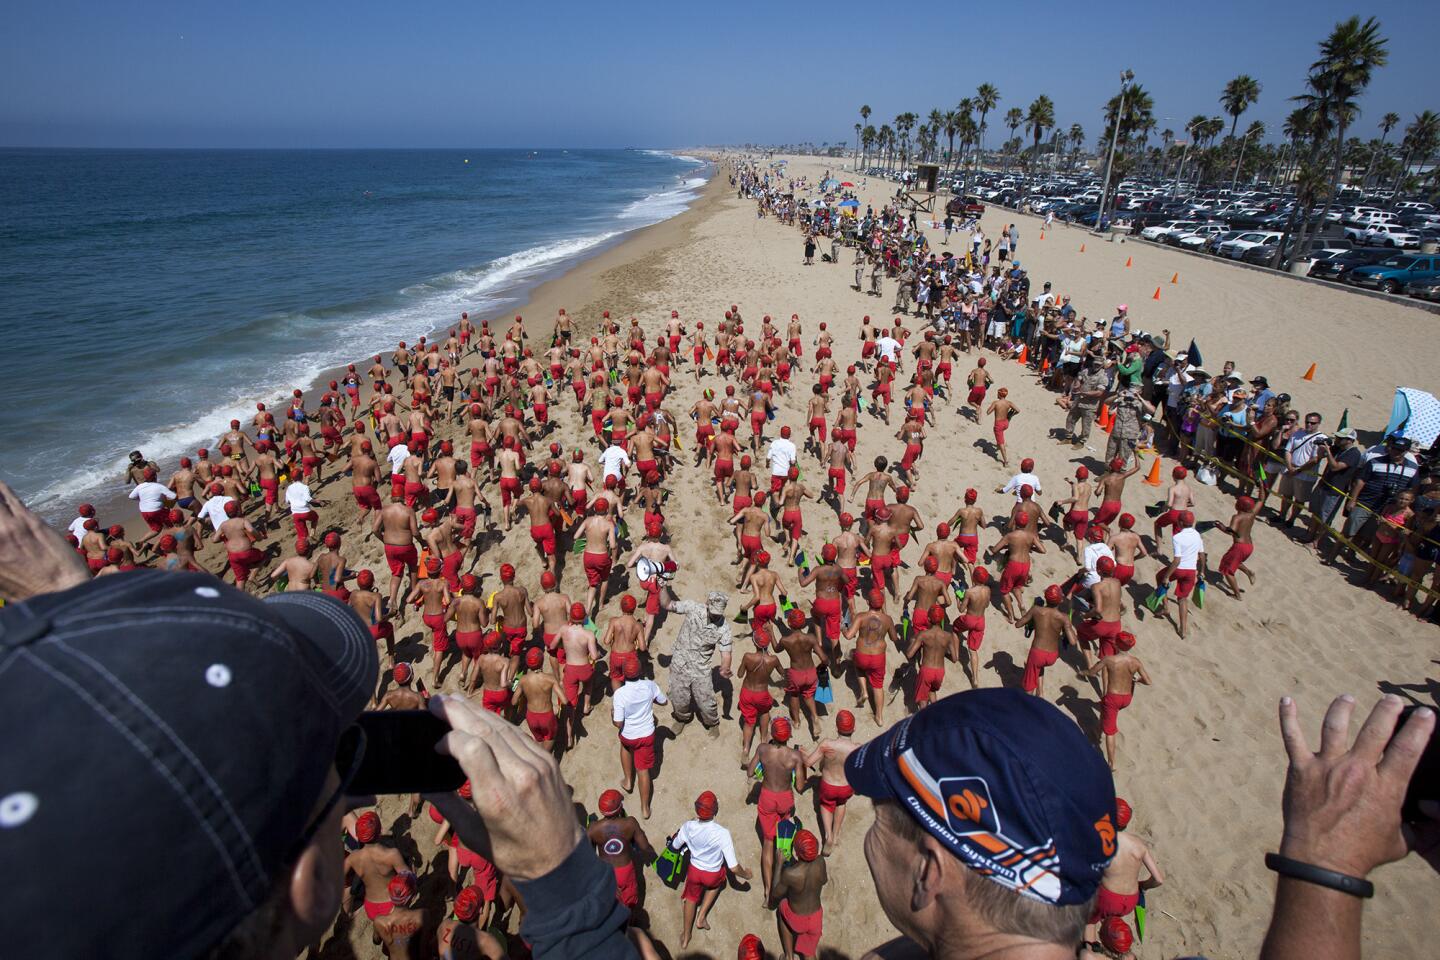 Group C starts their run during the annual monster mile event for the Newport Beach junior lifeguards at the Balboa Pier on Thursday, July 31. (Scott Smeltzer - Daily Pilot)